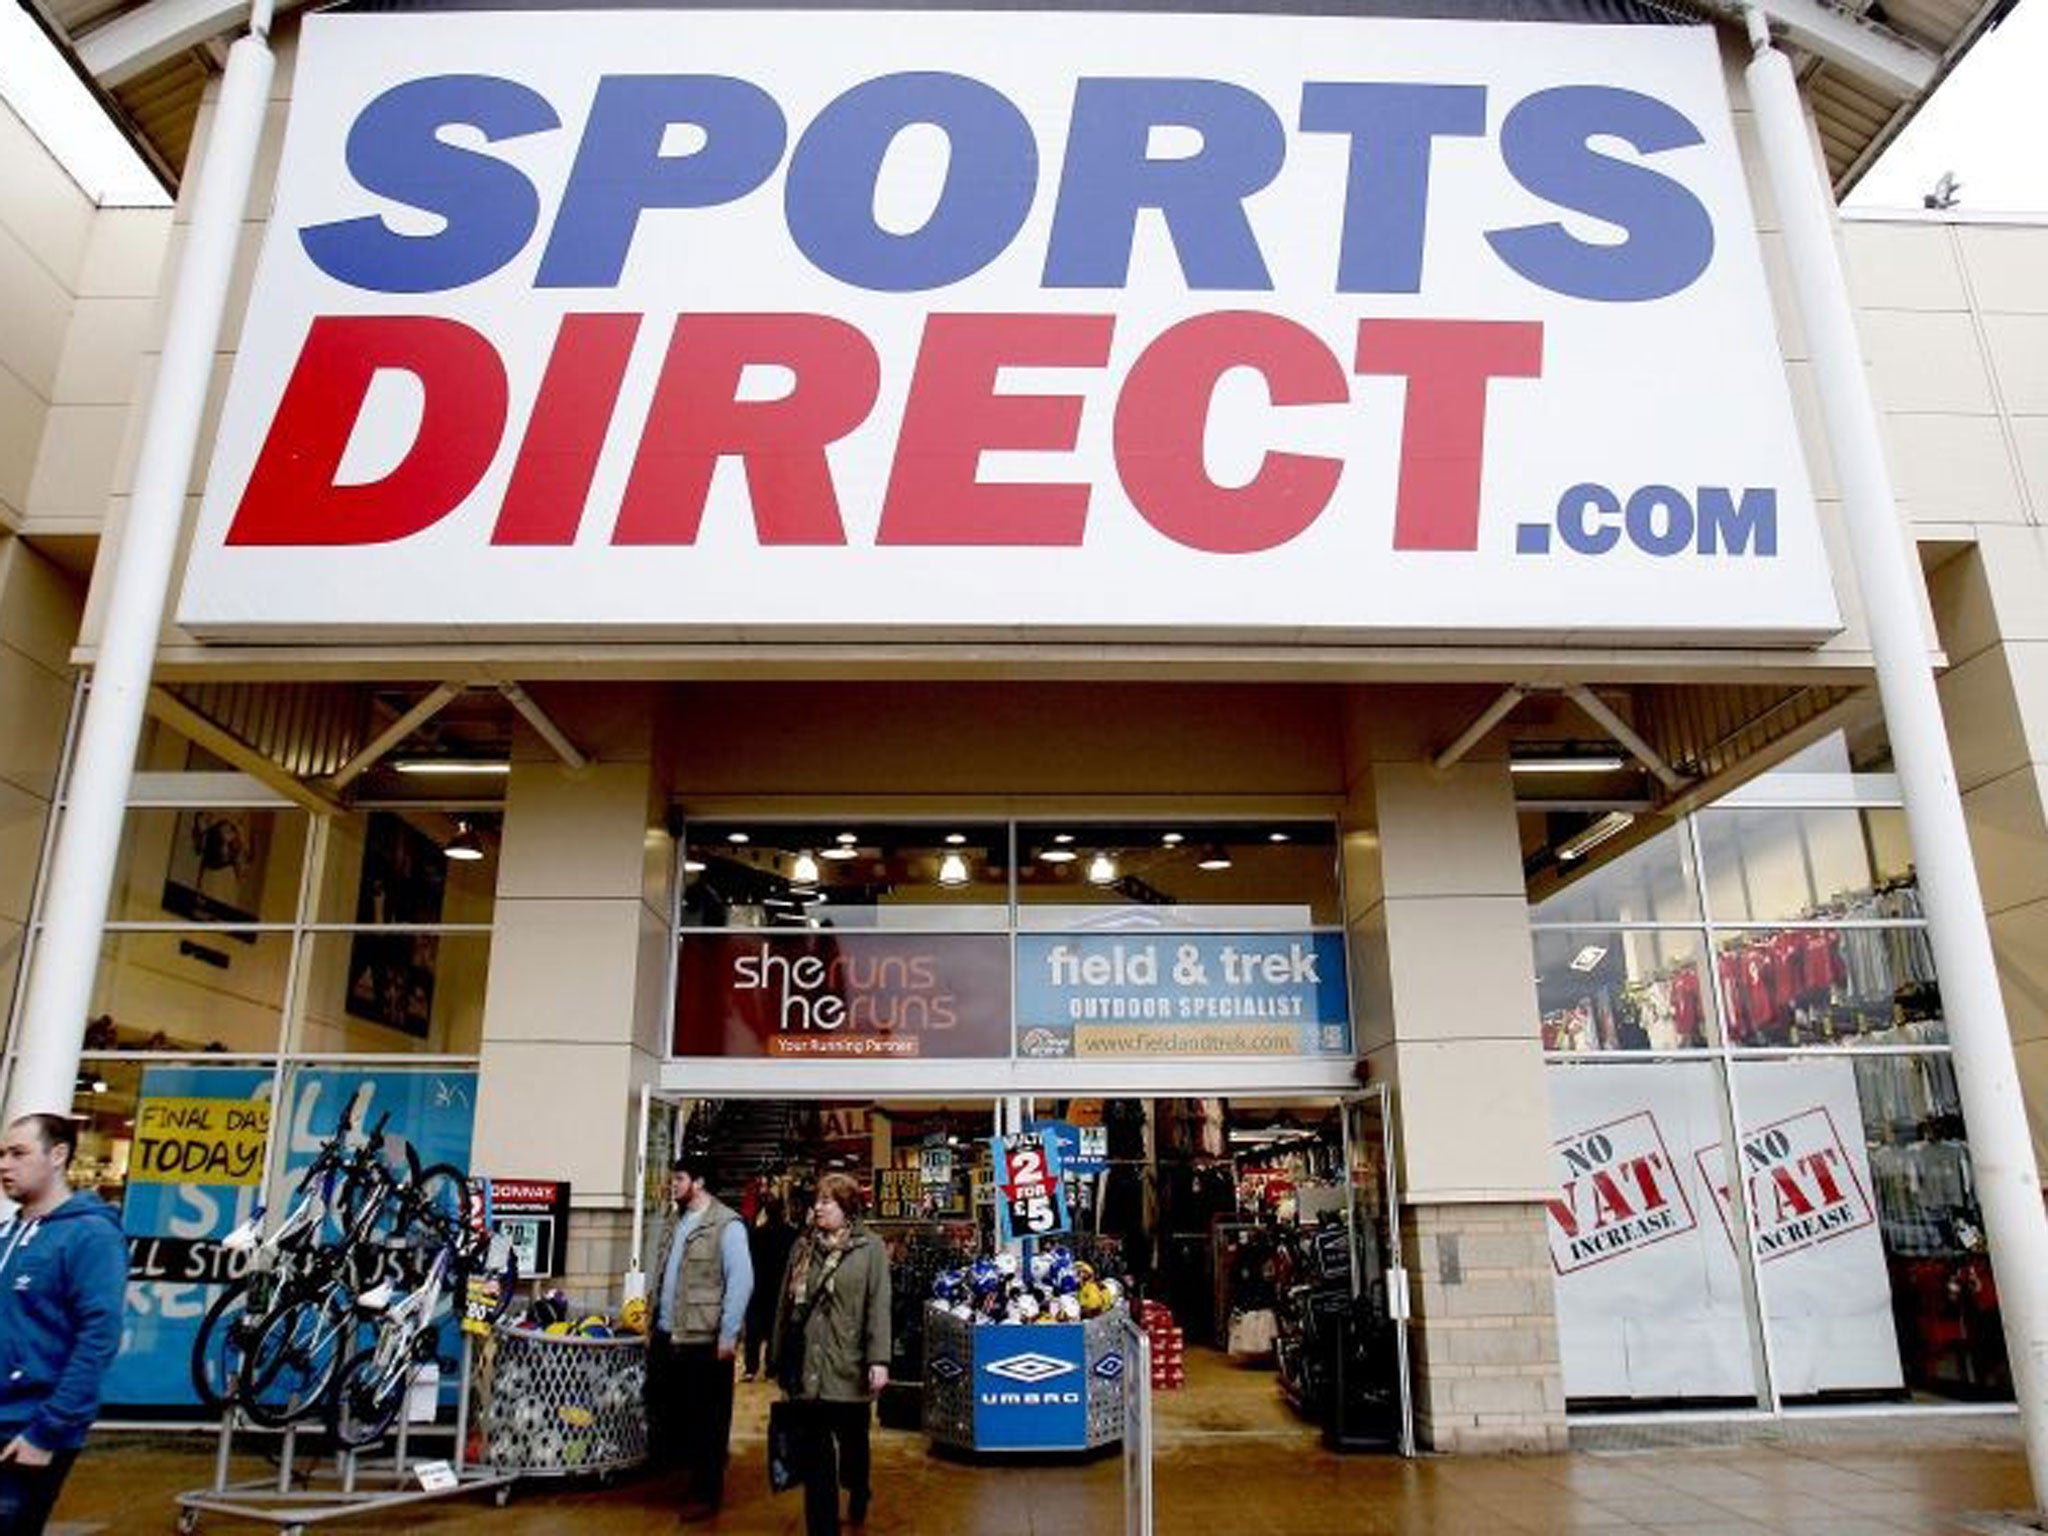 Sports Direct employs 20,000 people, 90% of its workforce, on a 'casual' basis